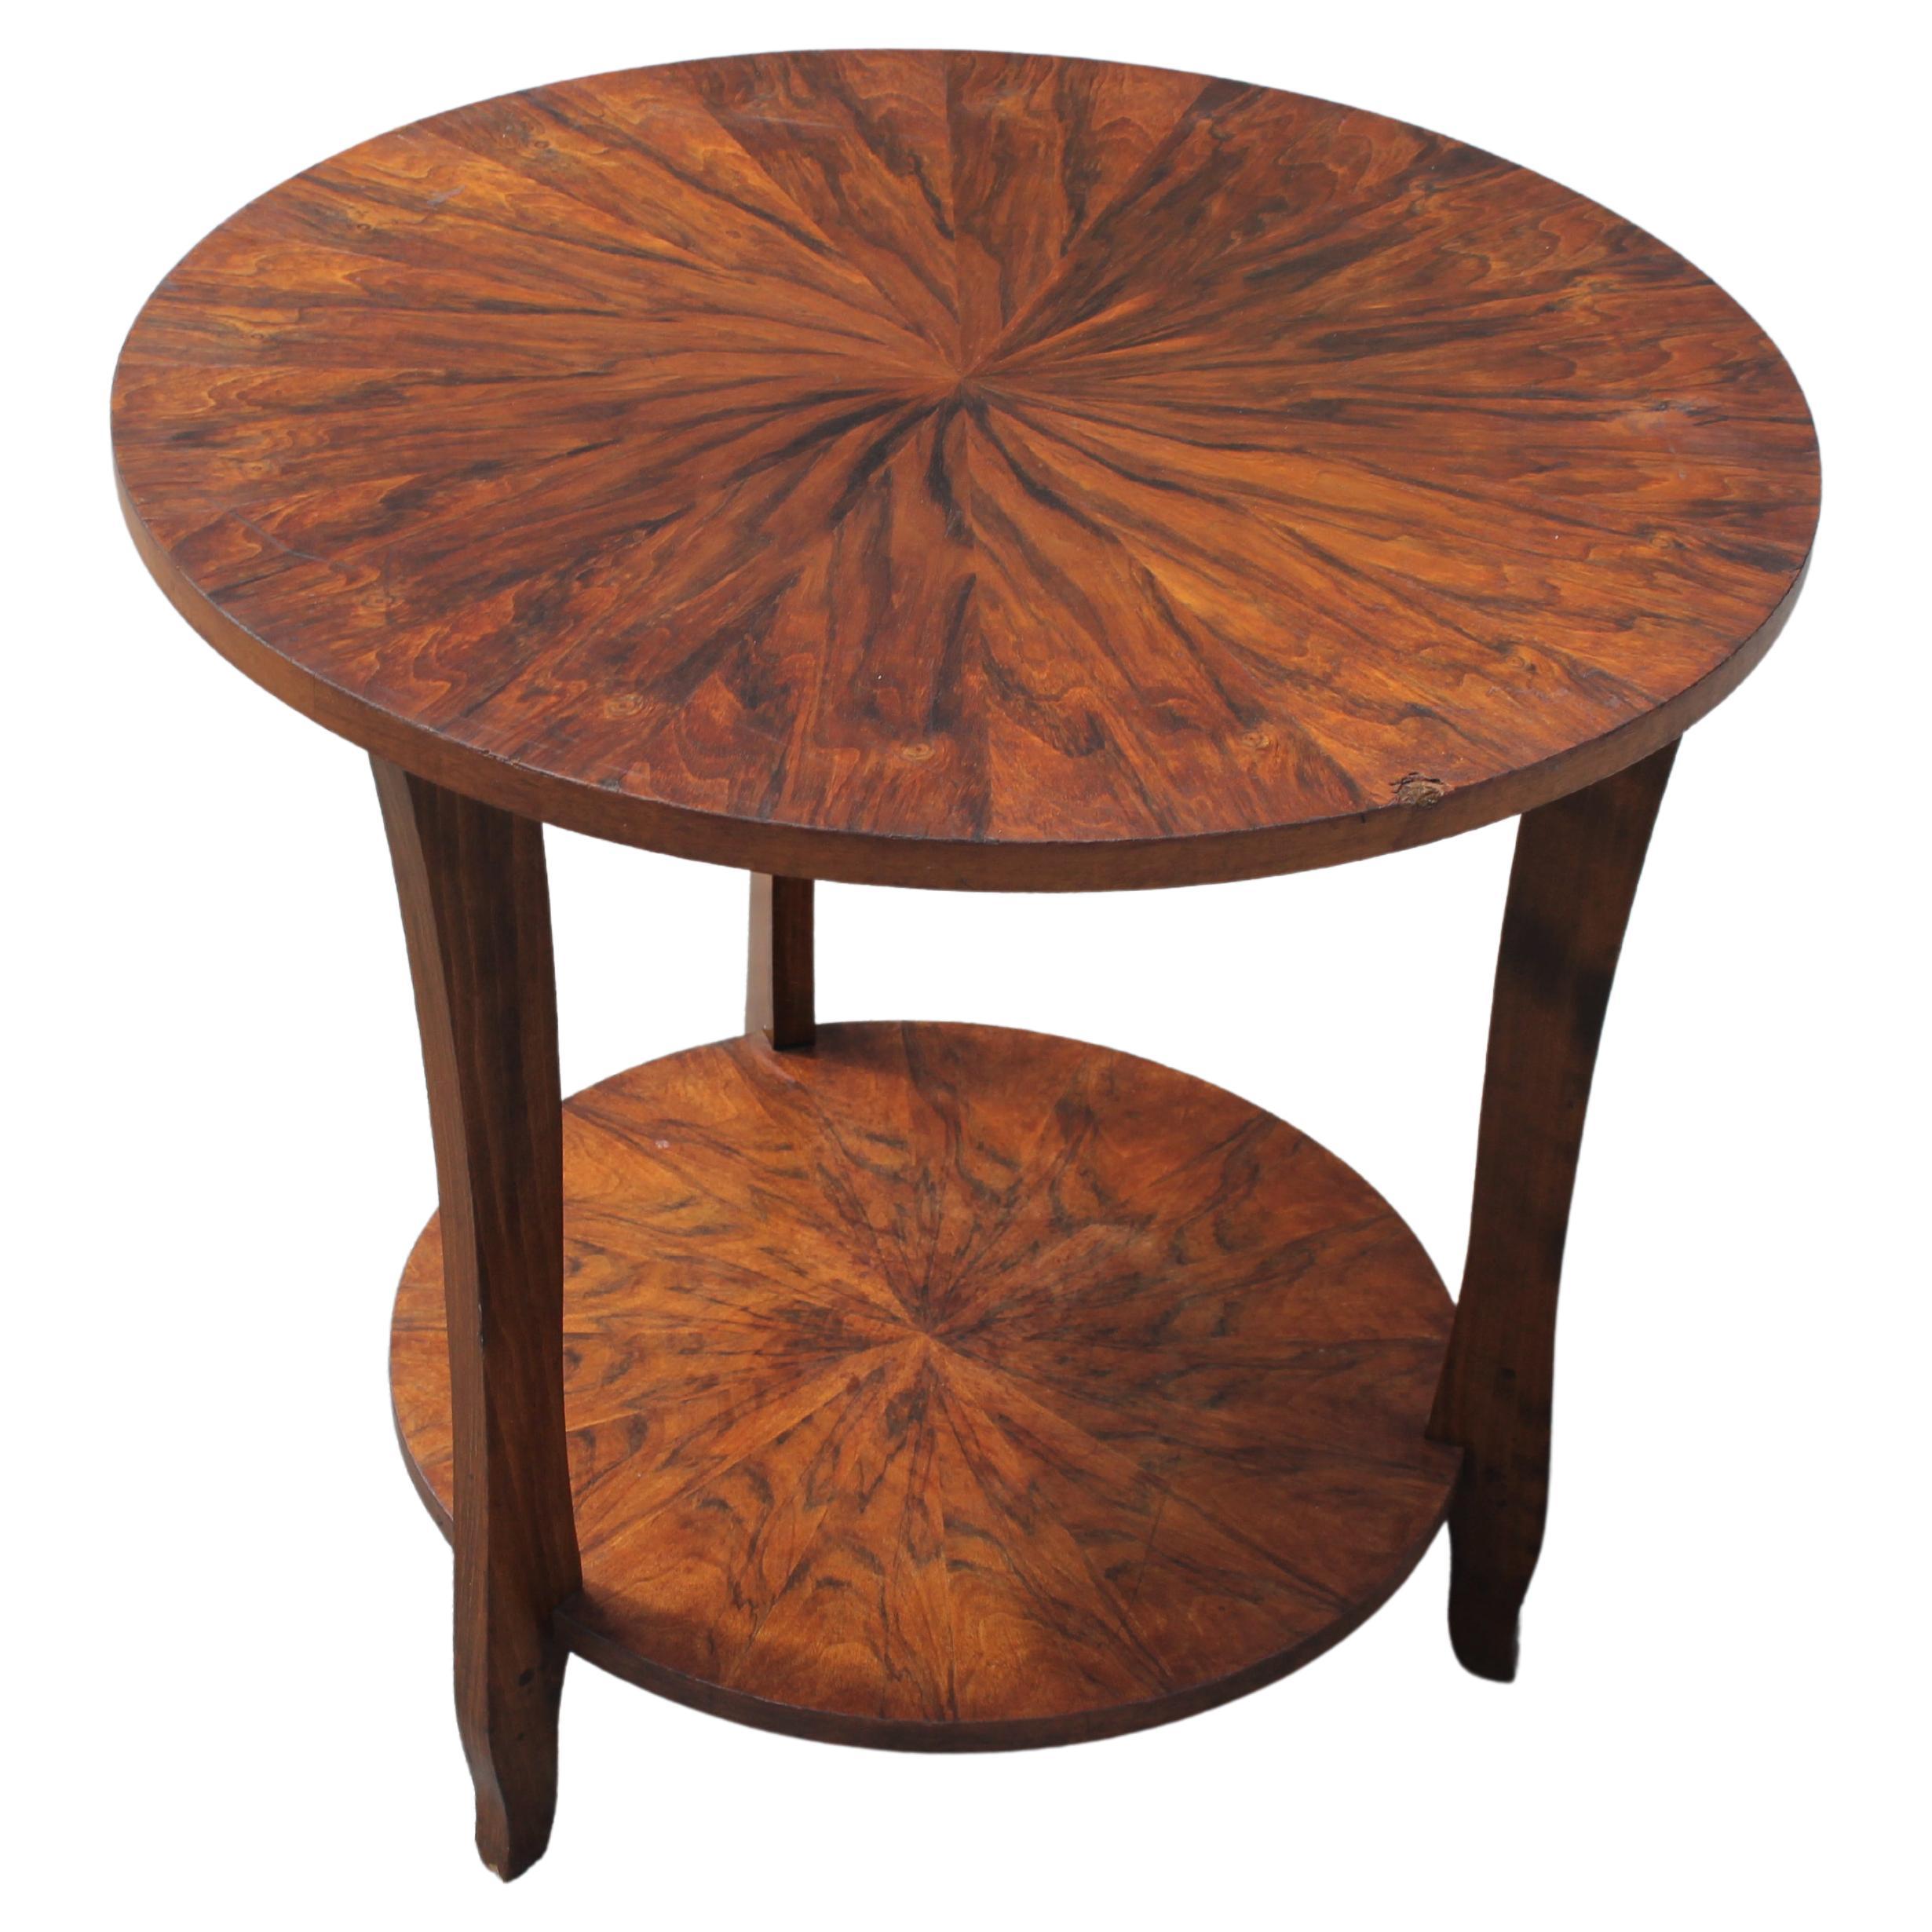 1930's French Art Deco Round Exotic Walnut Side Table/ Accent Table For Sale